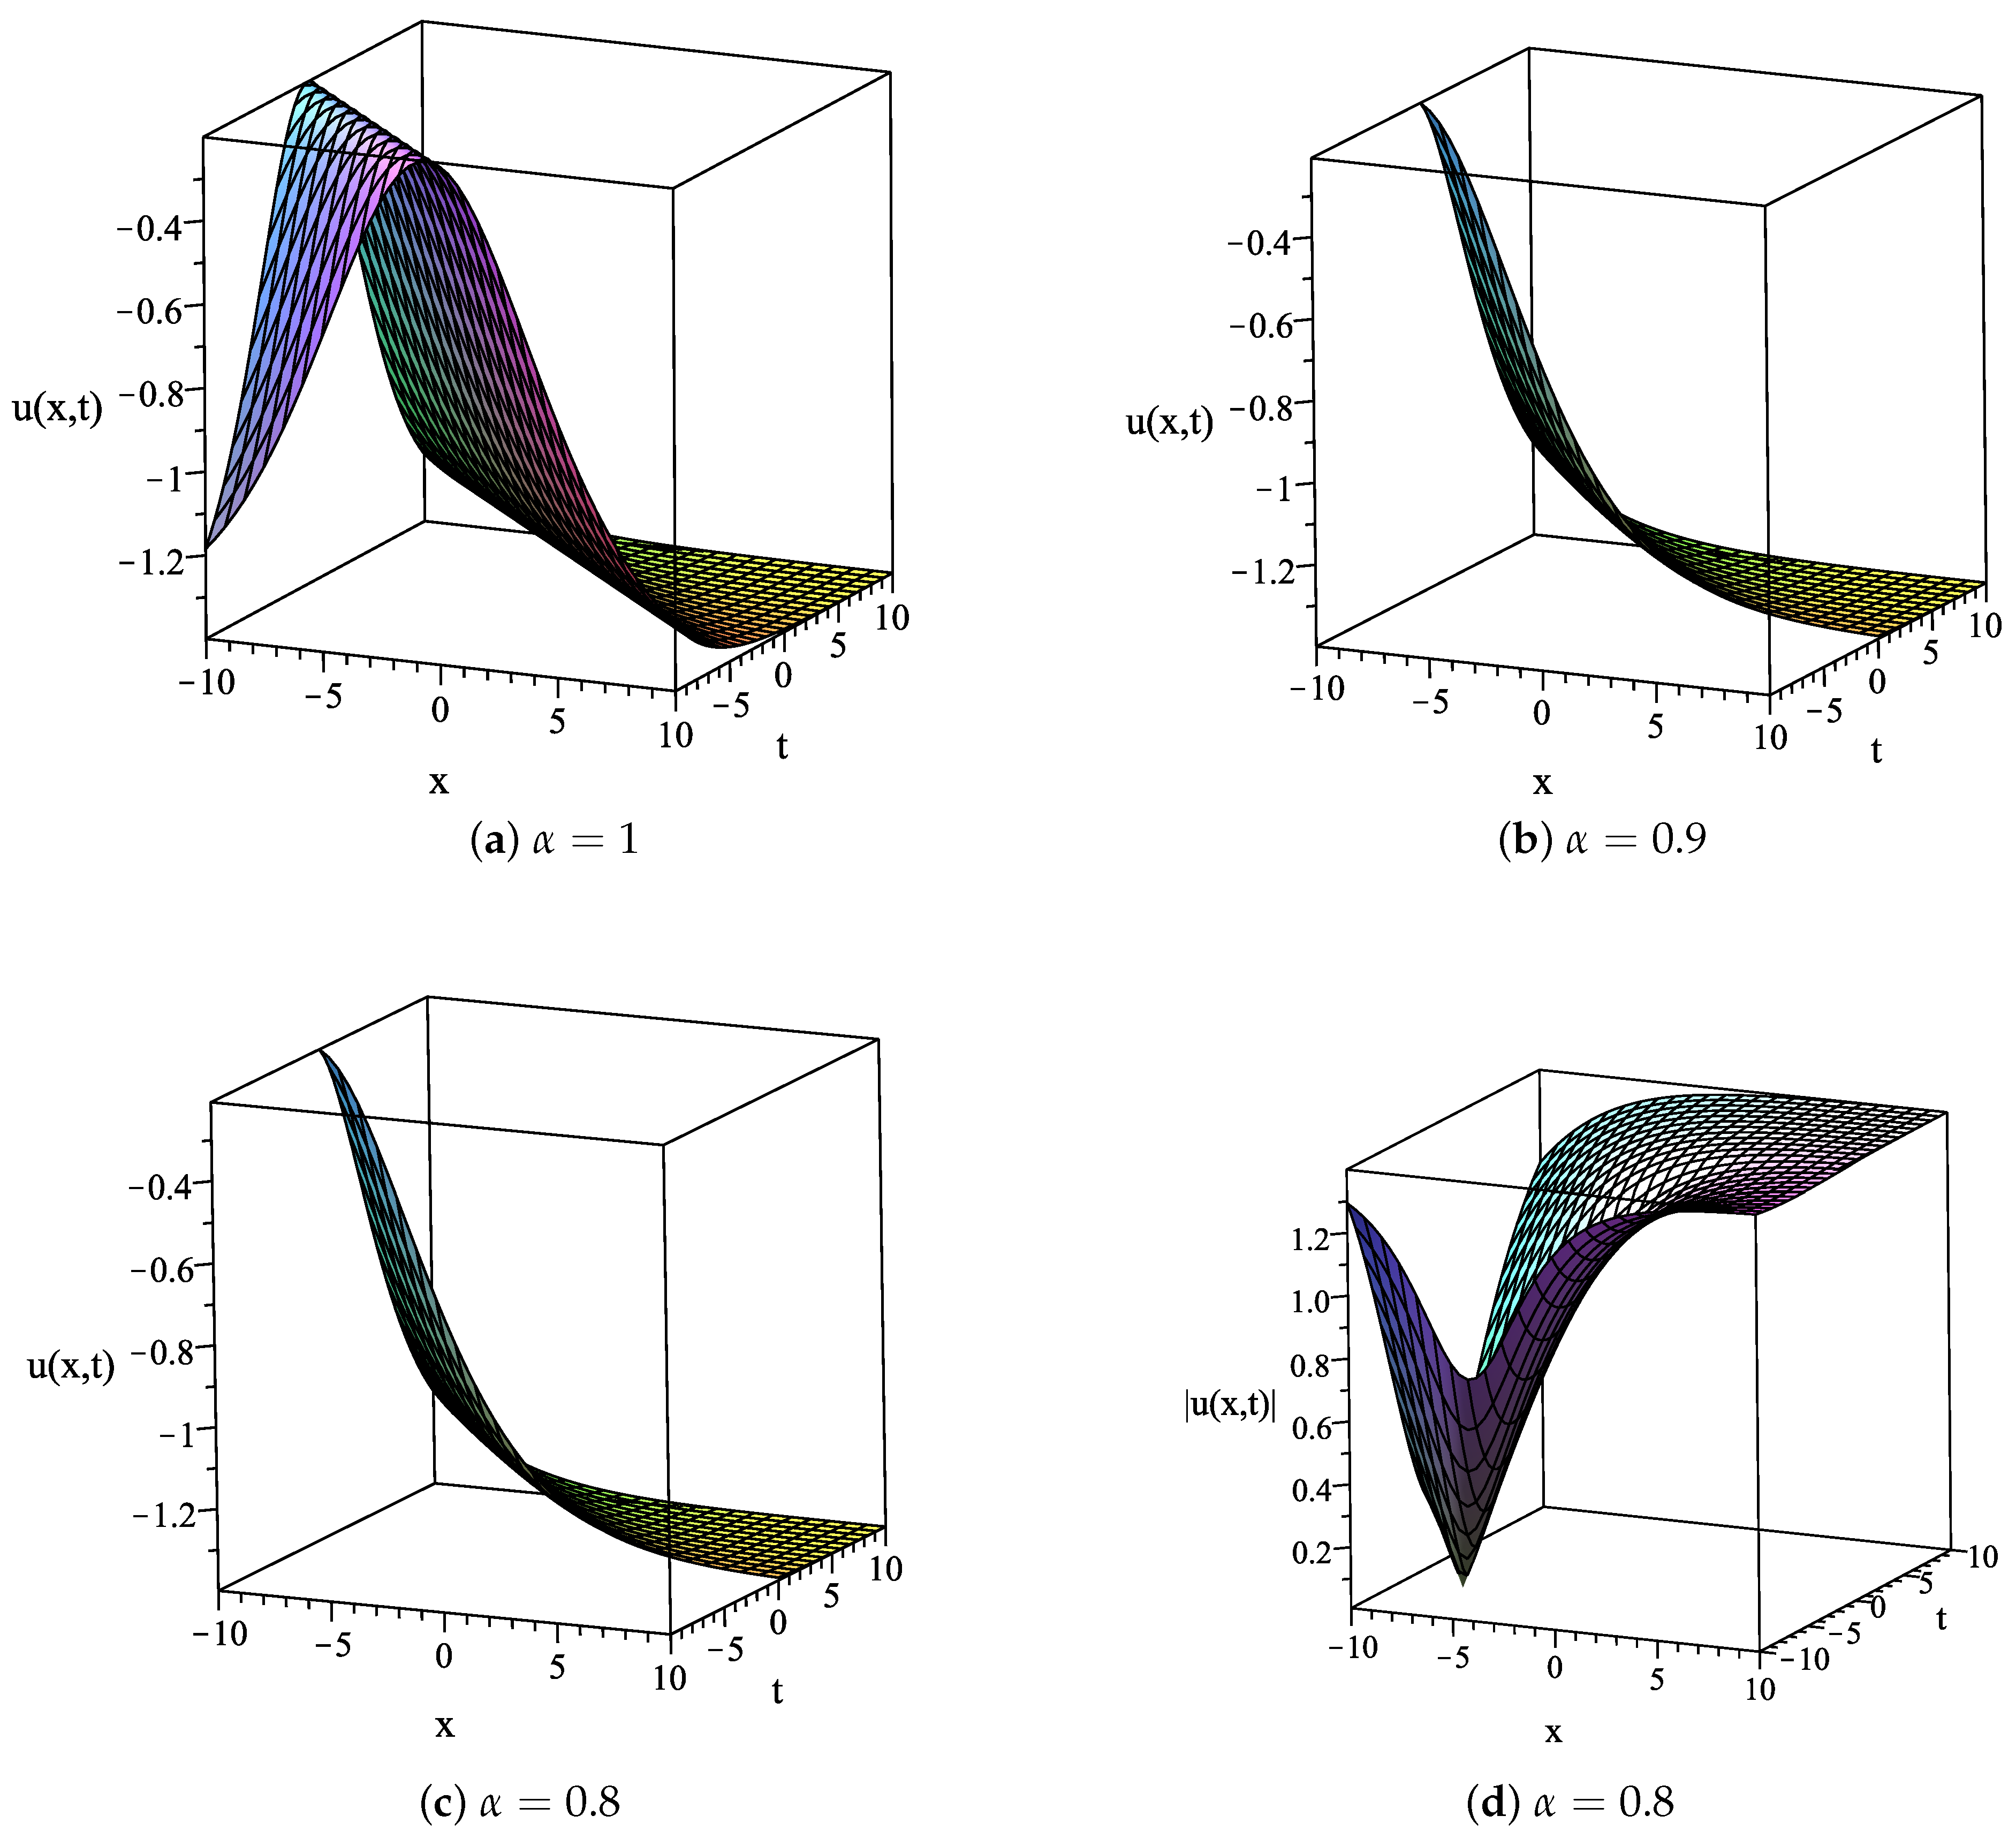 Symmetry Free Full Text Some Applications Of The G G 1 G Expansion Method For Finding Exact Traveling Wave Solutions Of Nonlinear Fractional Evolution Equations